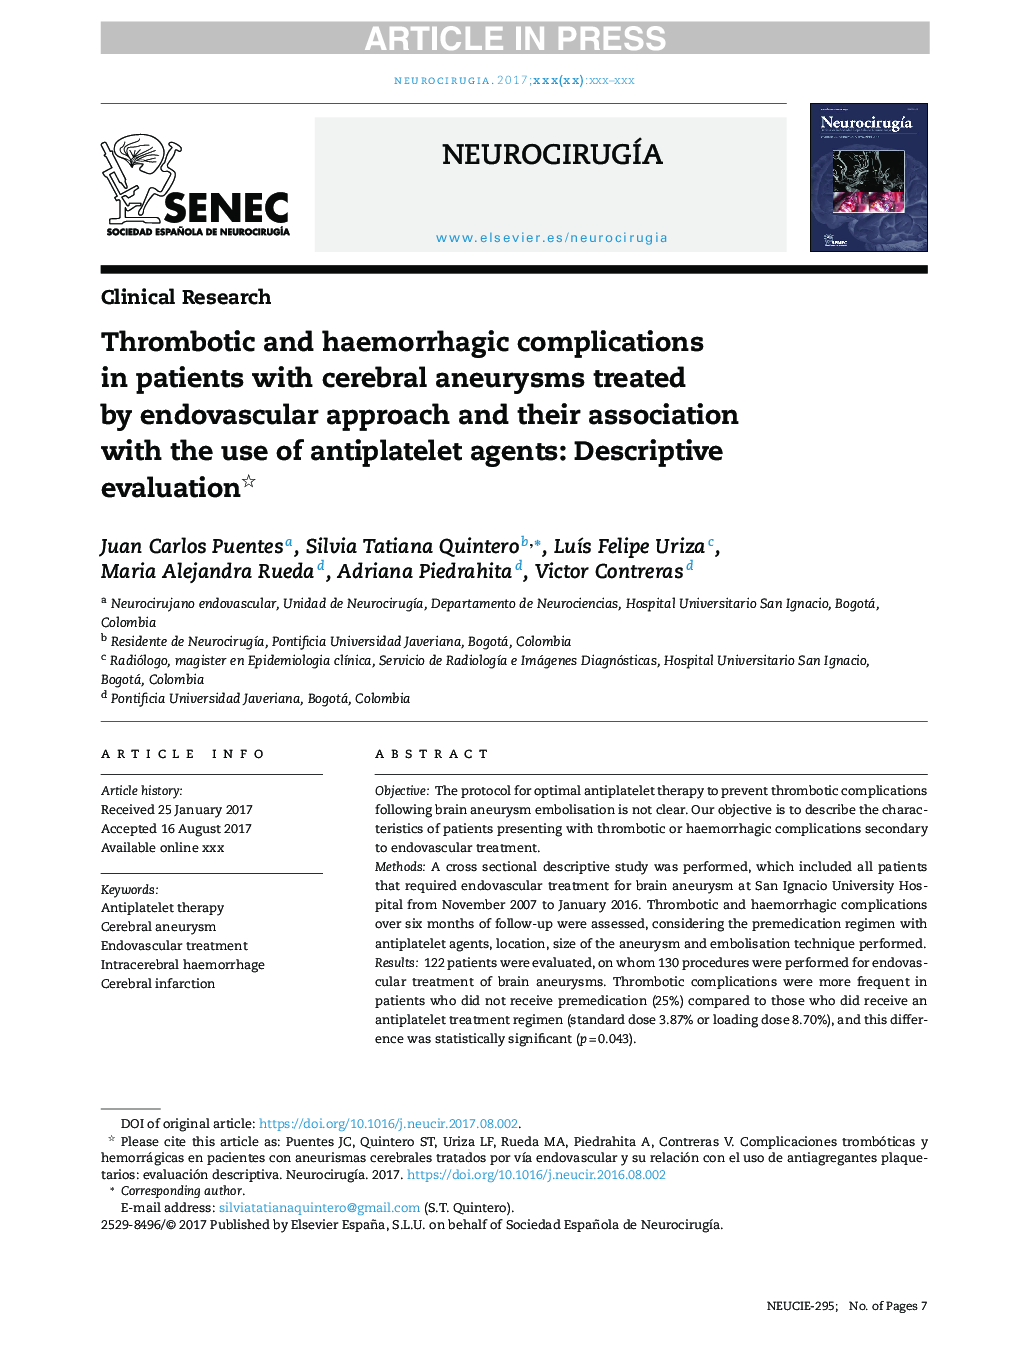 Thrombotic and haemorrhagic complications in patients with cerebral aneurysms treated by endovascular approach and their association with the use of antiplatelet agents: Descriptive evaluation